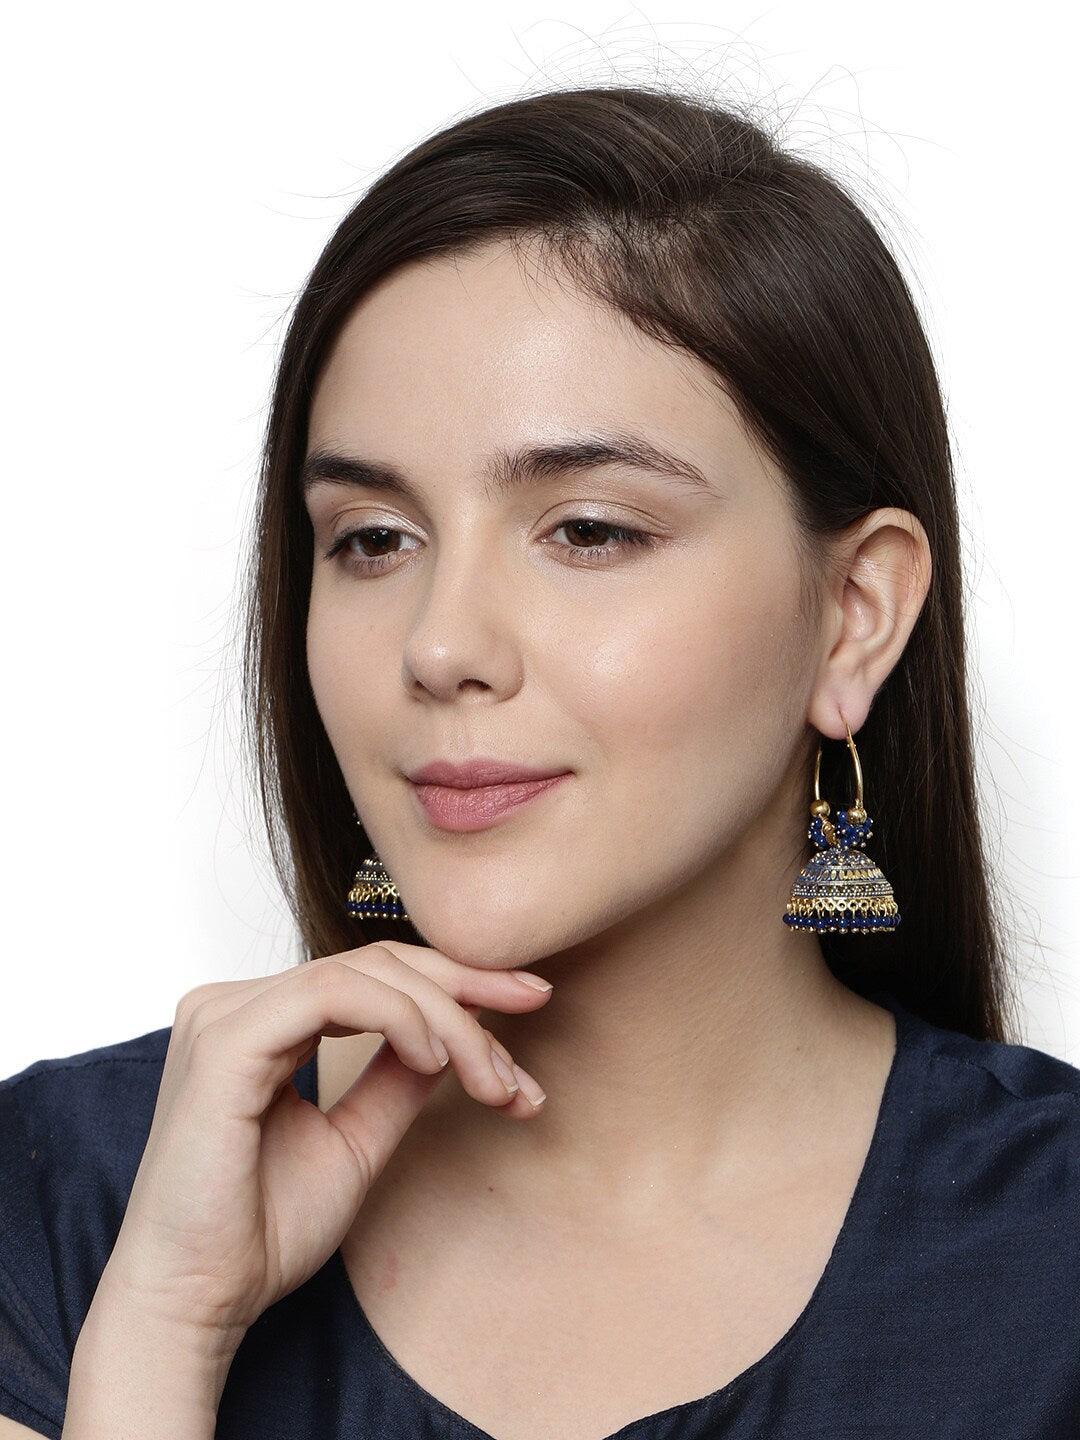 Blue & Gold-Plated Alloy Oxidized Enamelled Dome Shaped Jhumkas Traditional Hoop Jhumki Earrings For Women and Girls - Libasaa